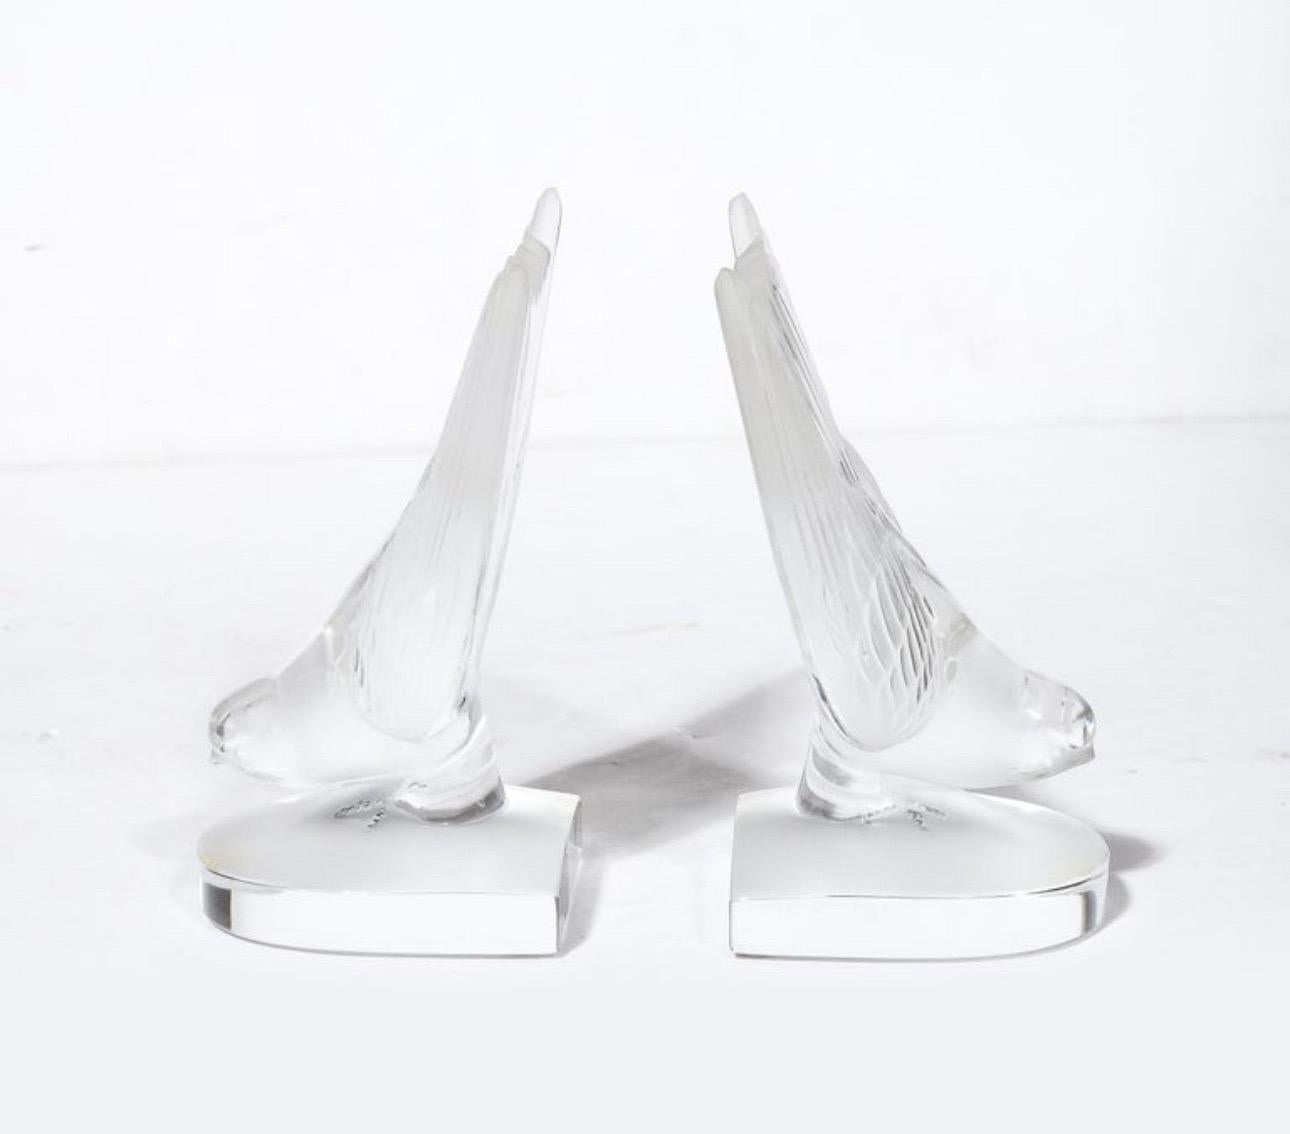 Pair of Frosted Crystal Hirondelle / Swallow Bookends by Lalique of France In Good Condition For Sale In San Diego, CA